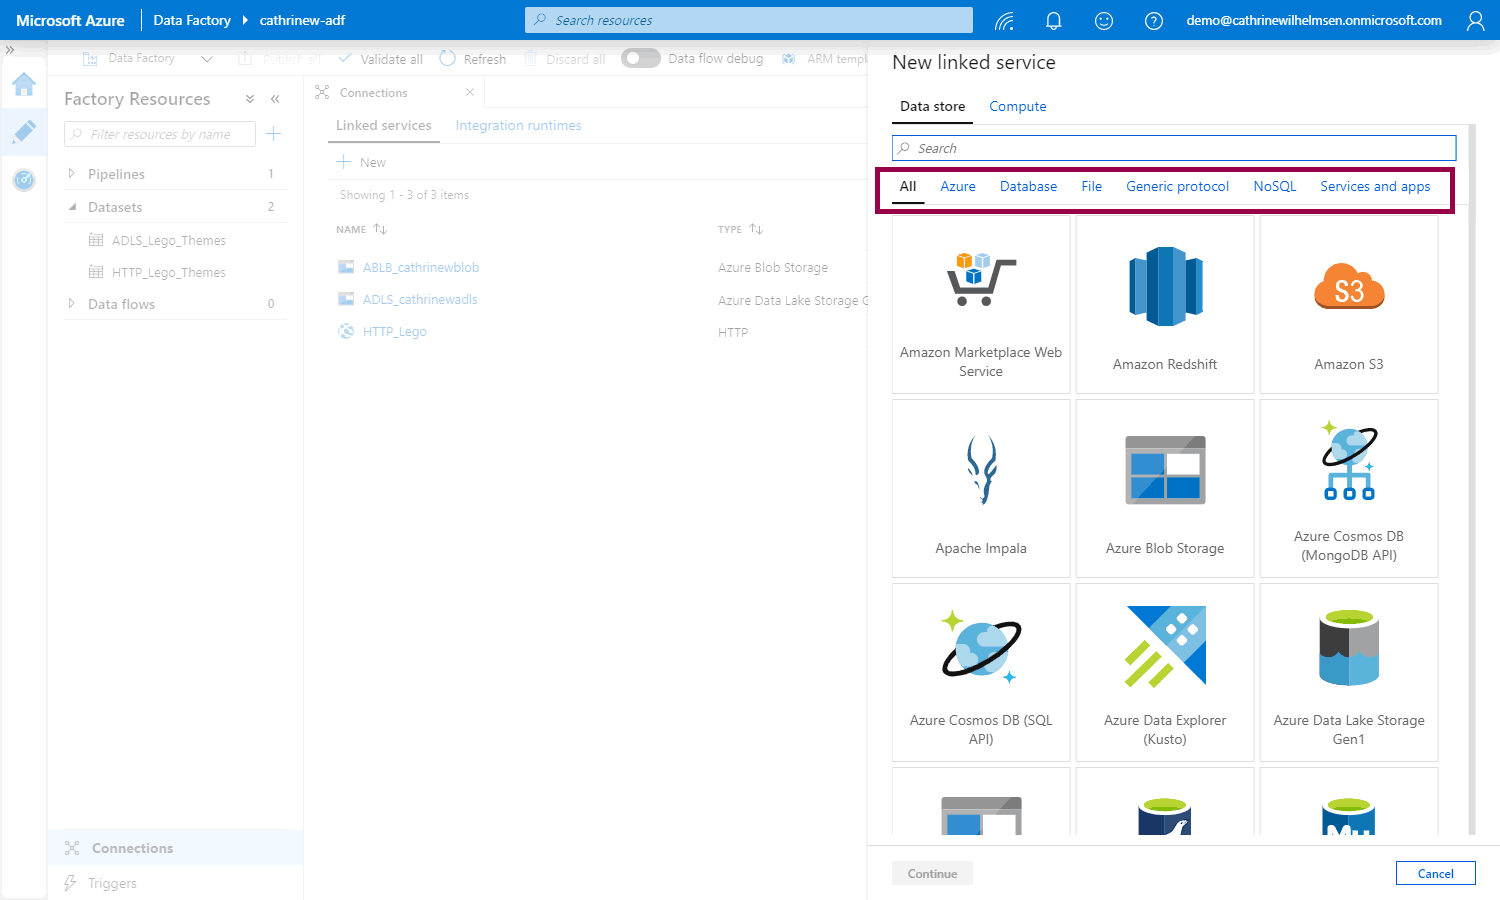 Screenshot of the new linked service pane, highlighting data store sub-categories